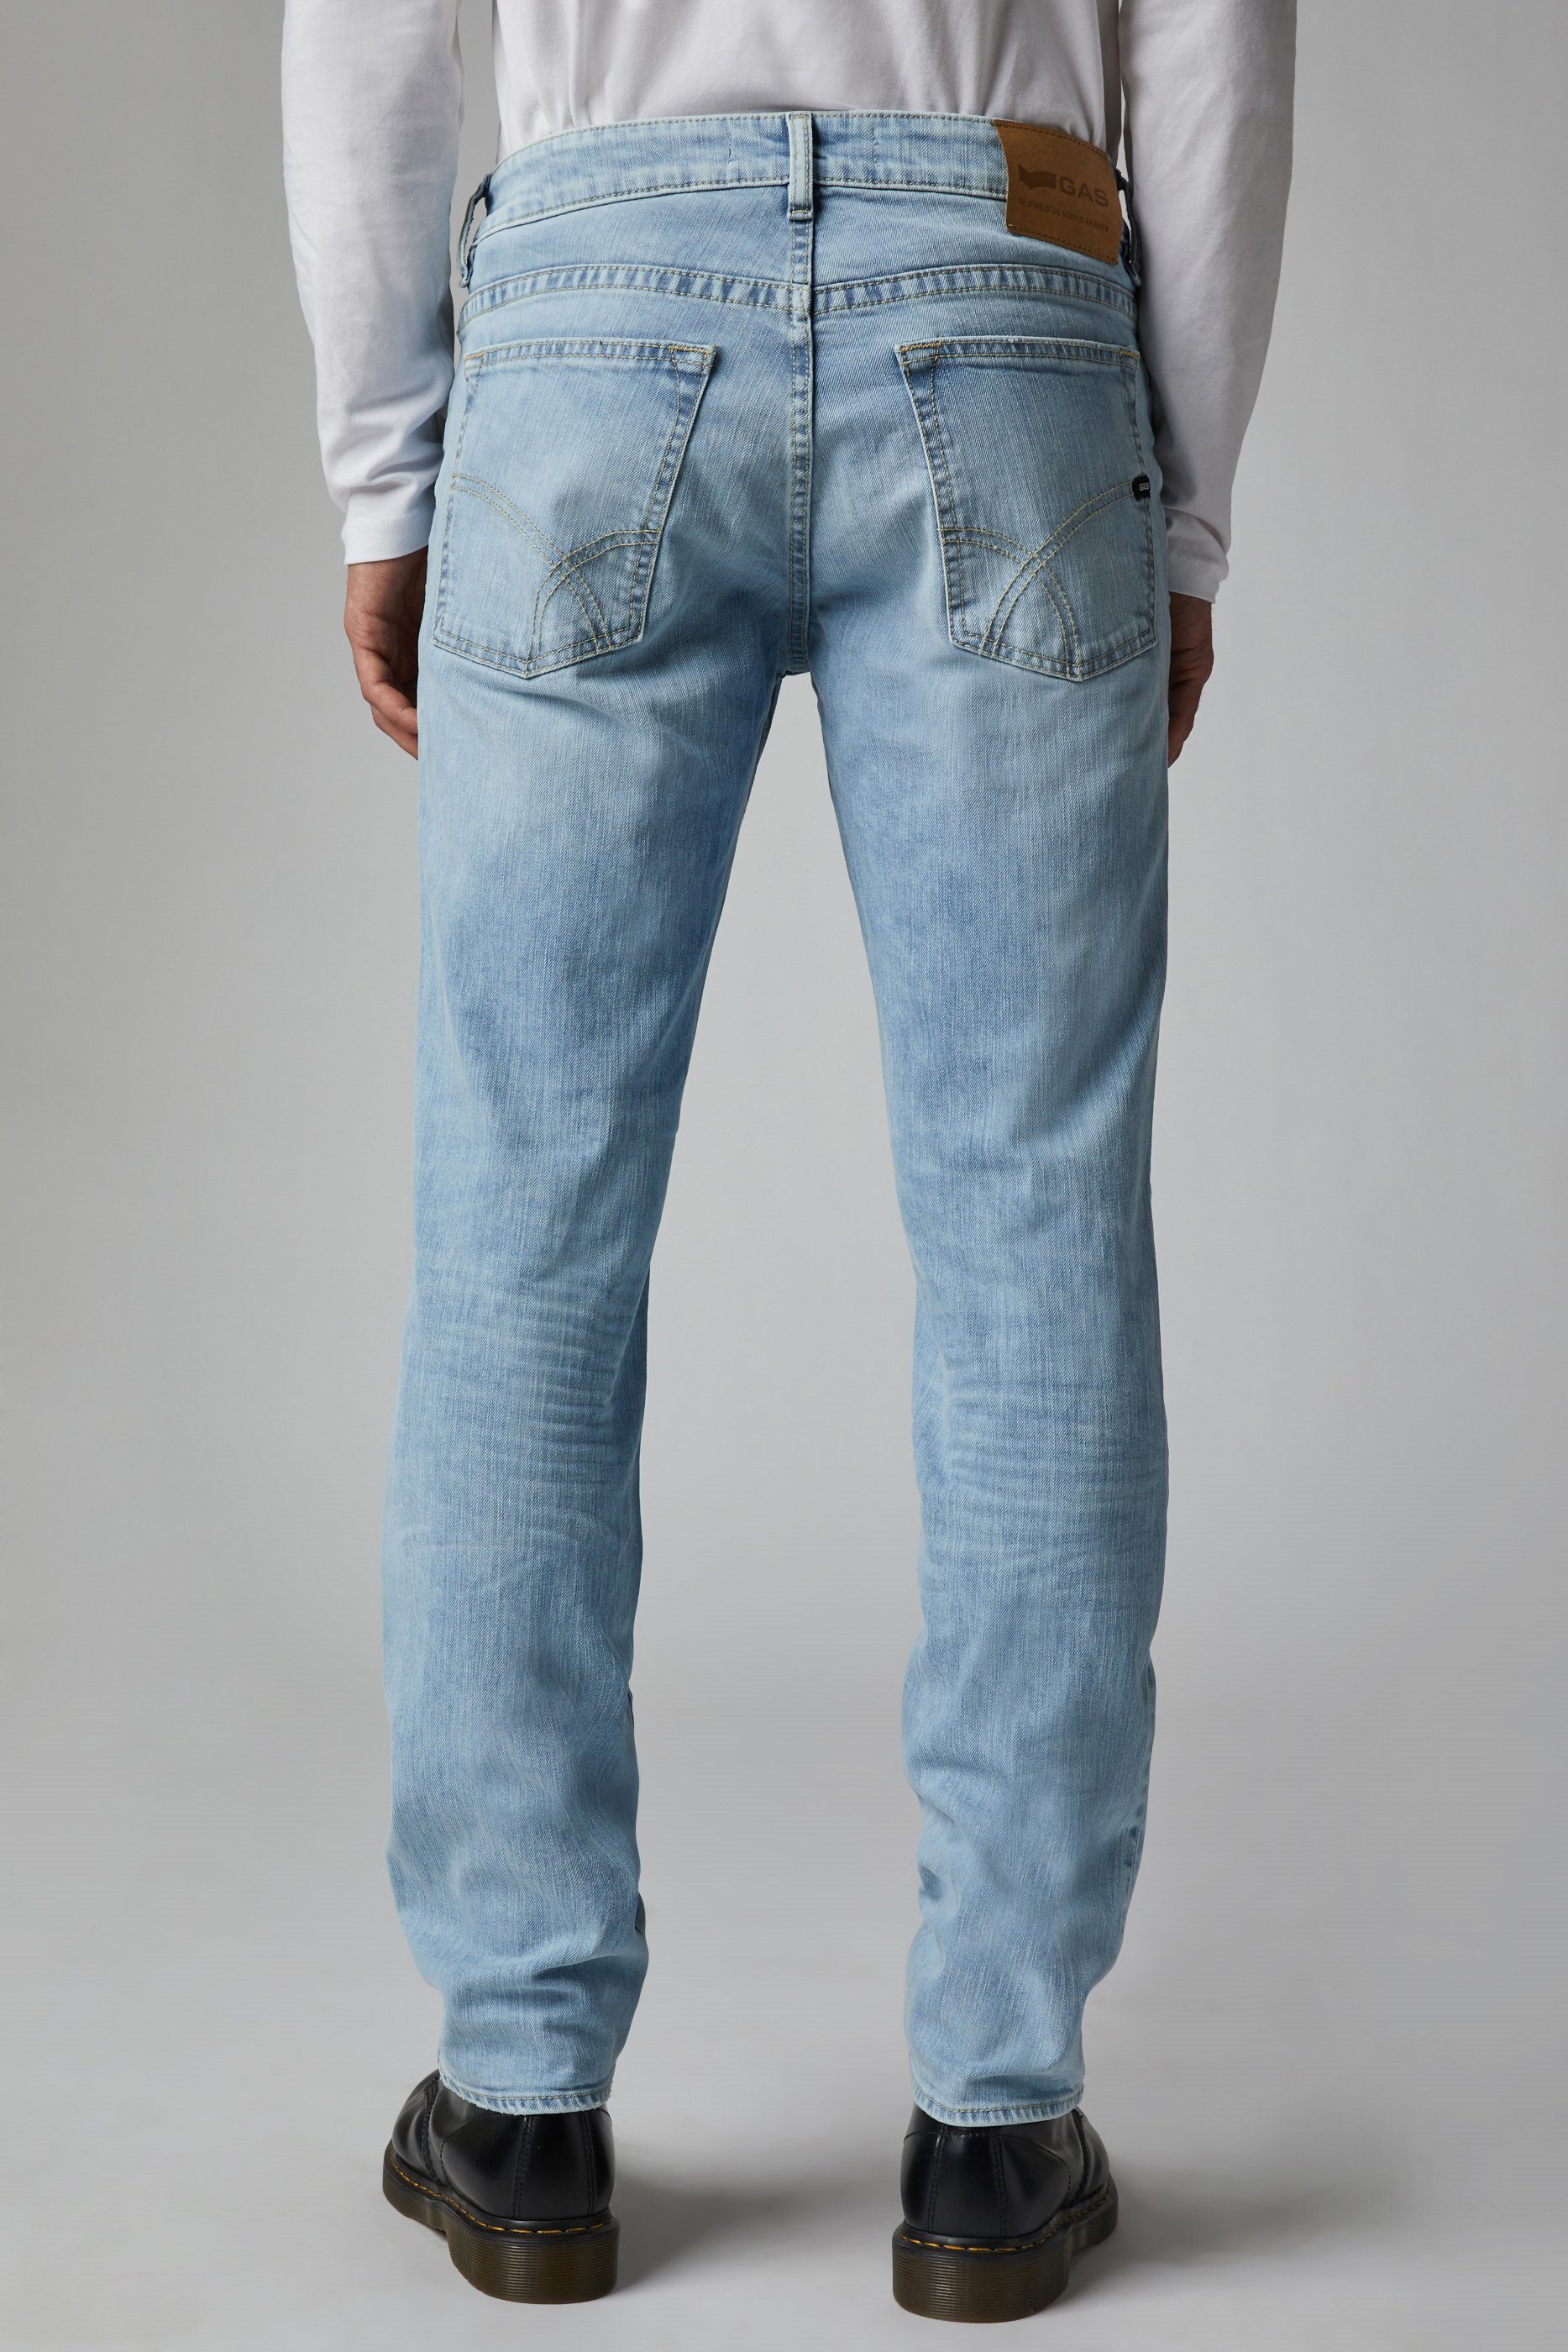 mit Slim-fit-Jeans Super-Bleached-Waschung wash bleach super GAS ANDERS